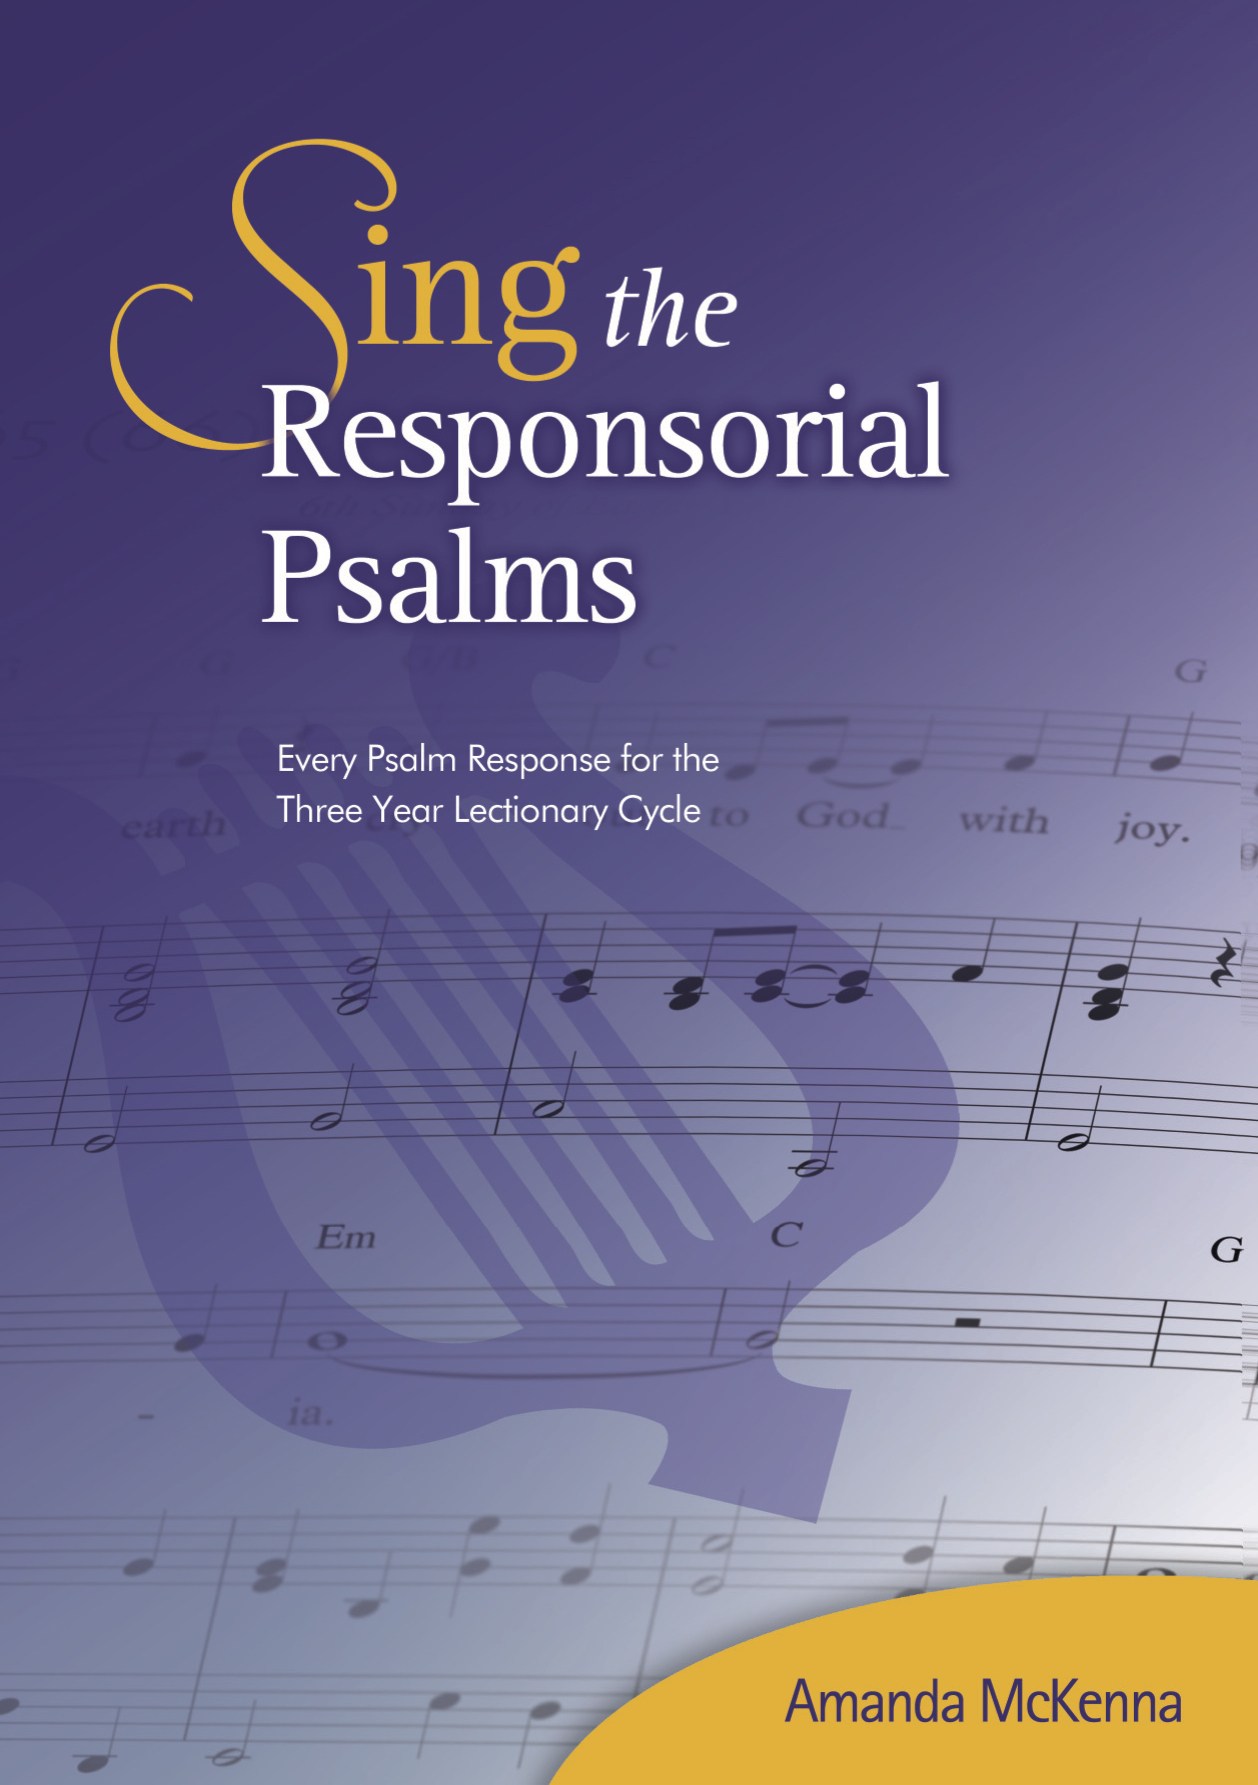 Sing the Responsorial Psalms